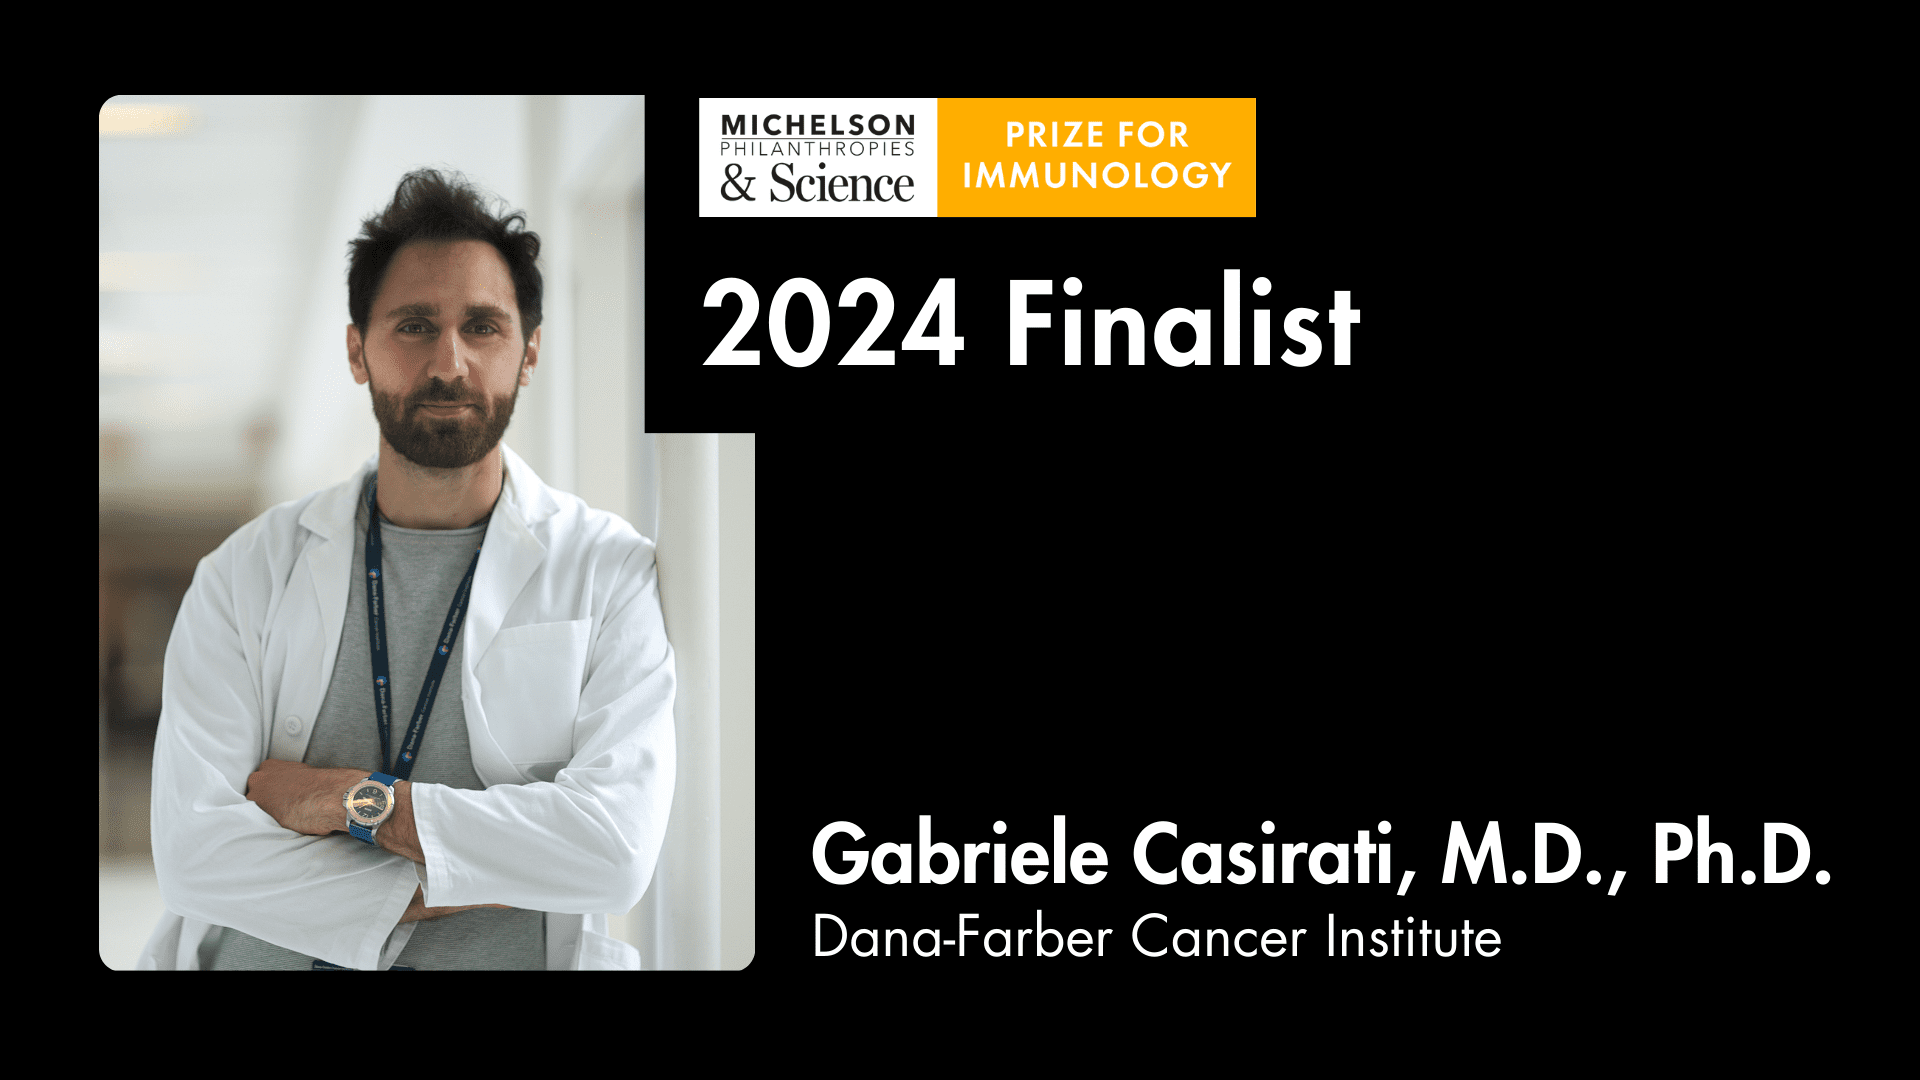 Michelson Prize Finalist Dr. Gabriele Casirati Makes Cancer Immunotherapies Safer through Genetic Engineering